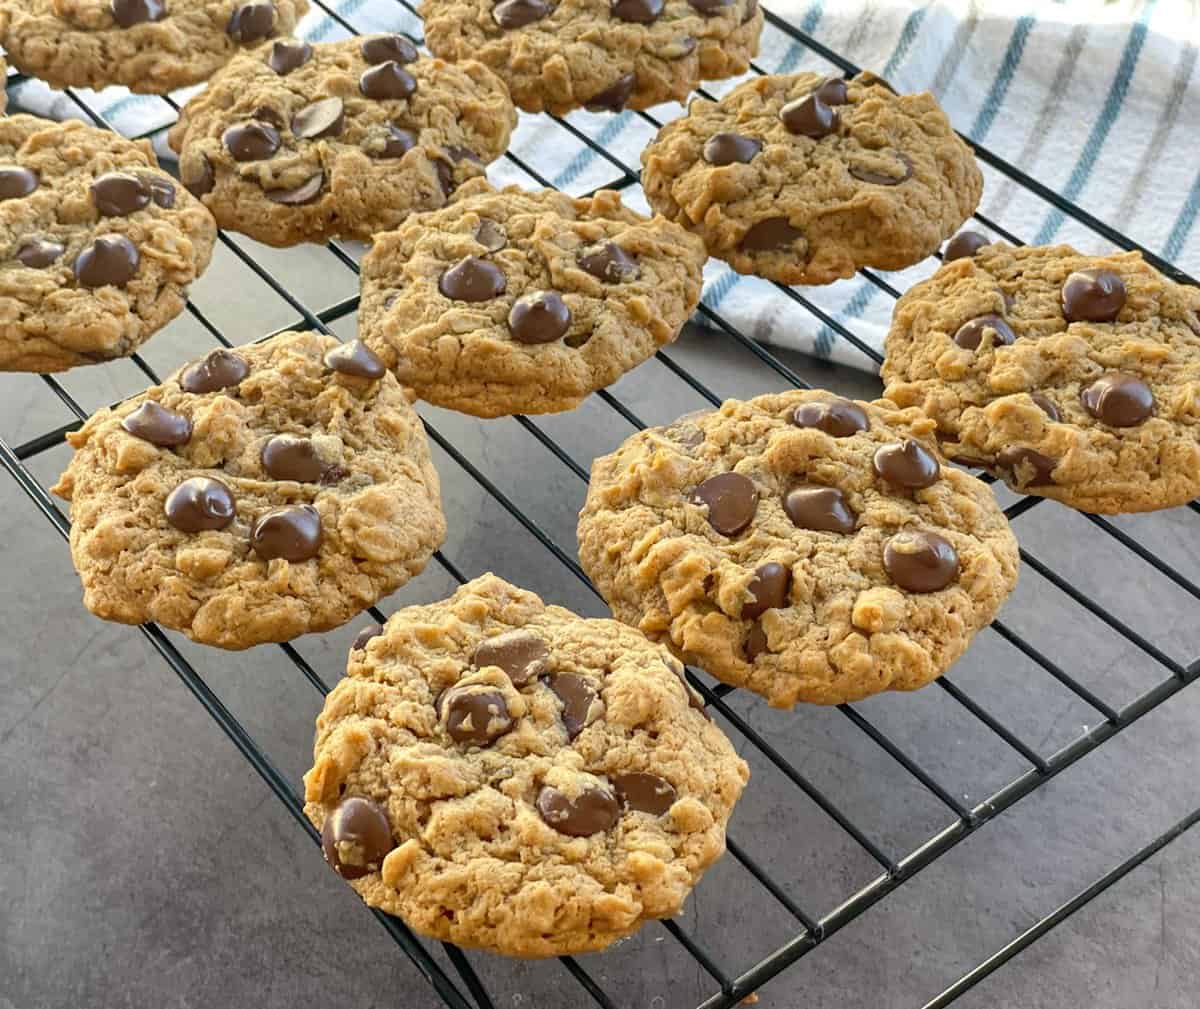 Freshly baked warm flourless peanut butter, oatmeal and chocolate cookies 